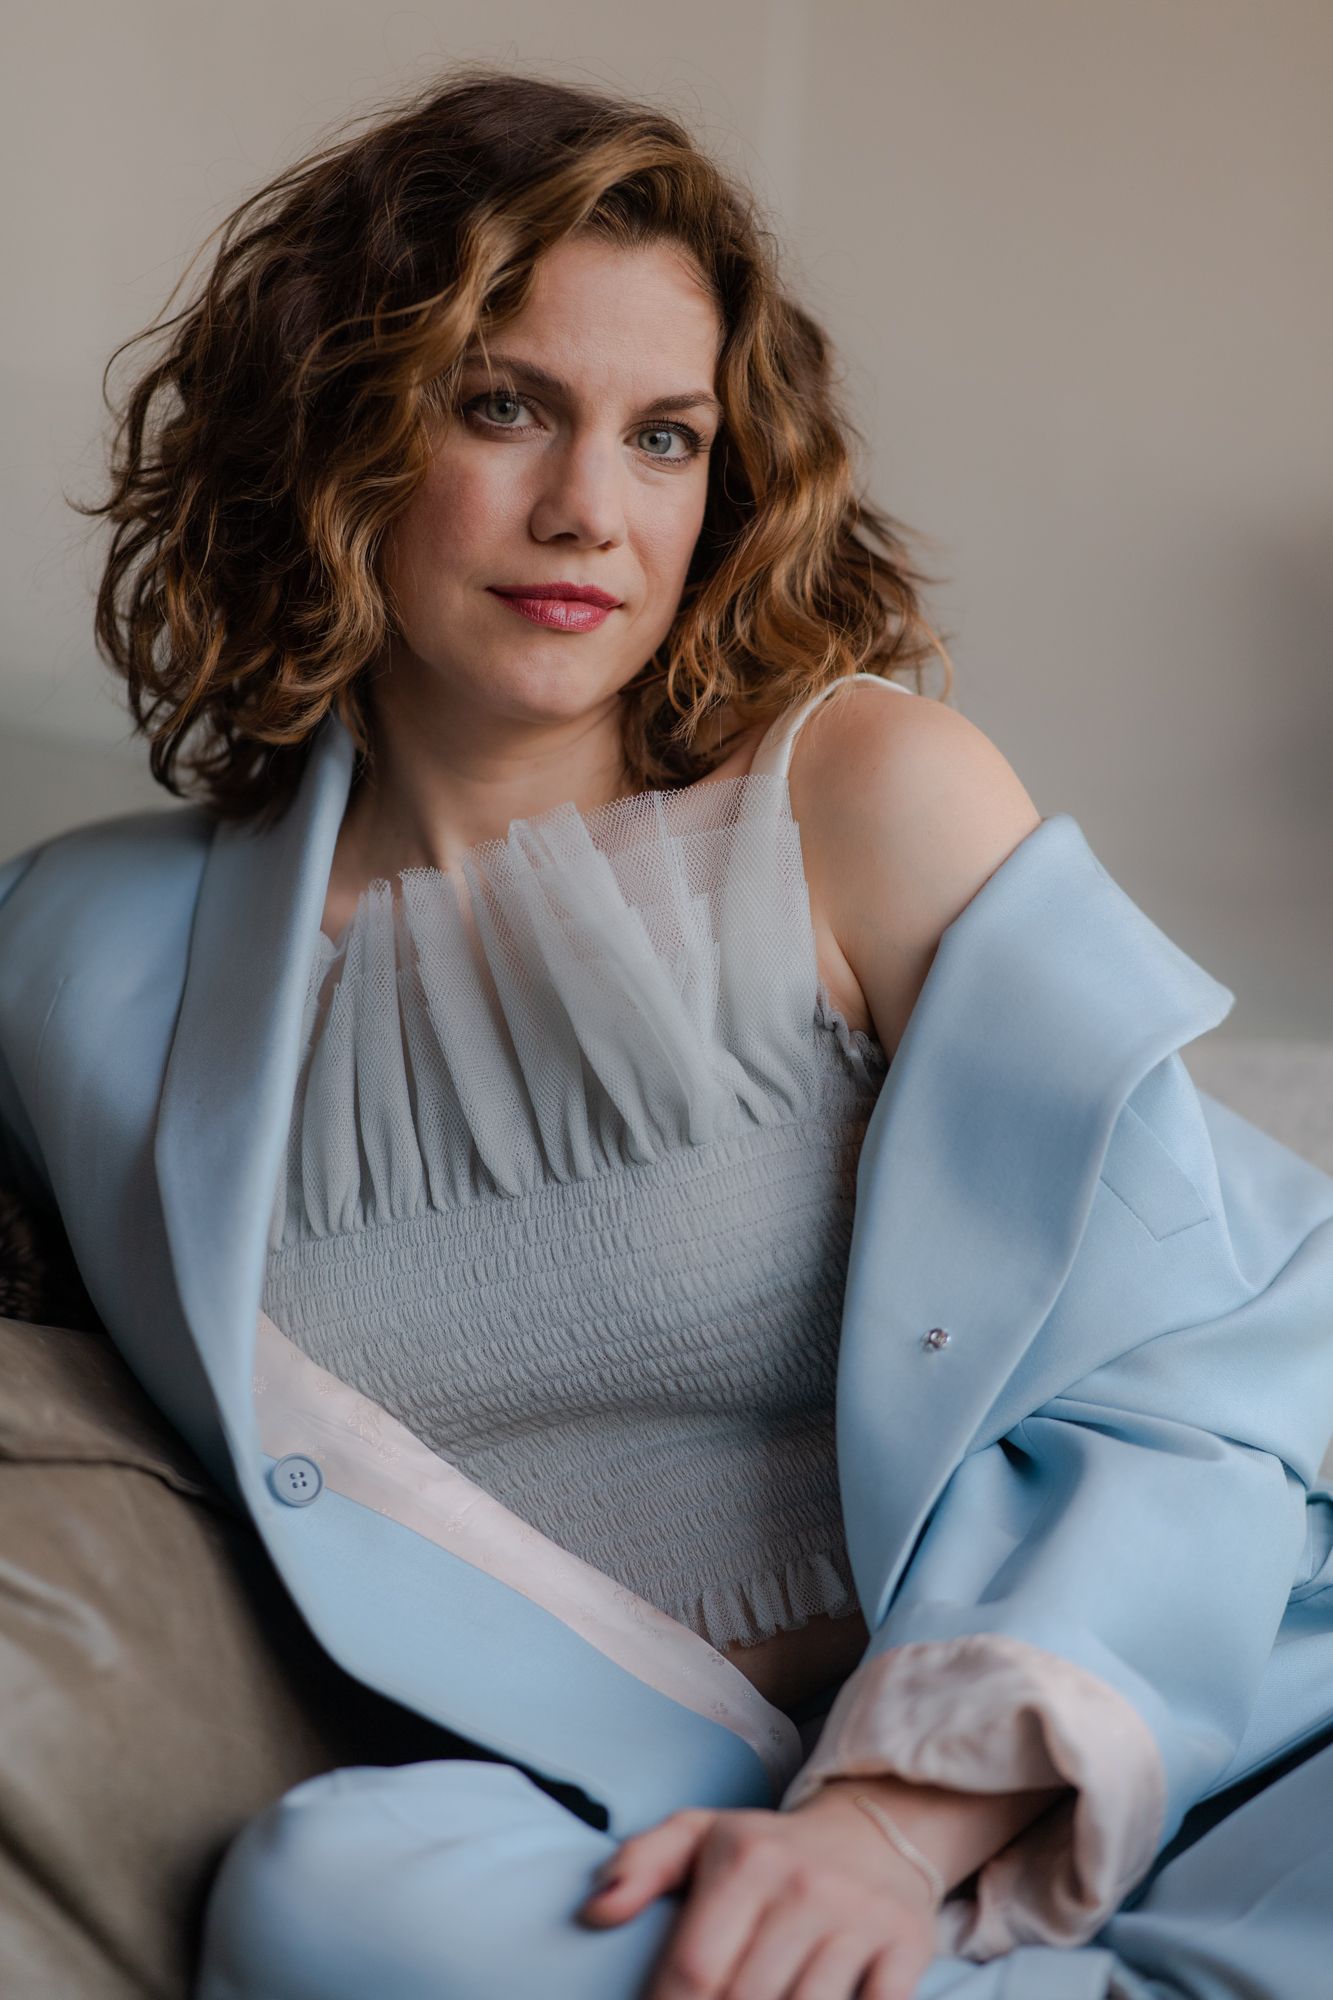 Anna Chlumsky On Inventing Anna, Playing Vivian Kent, And Veep pic